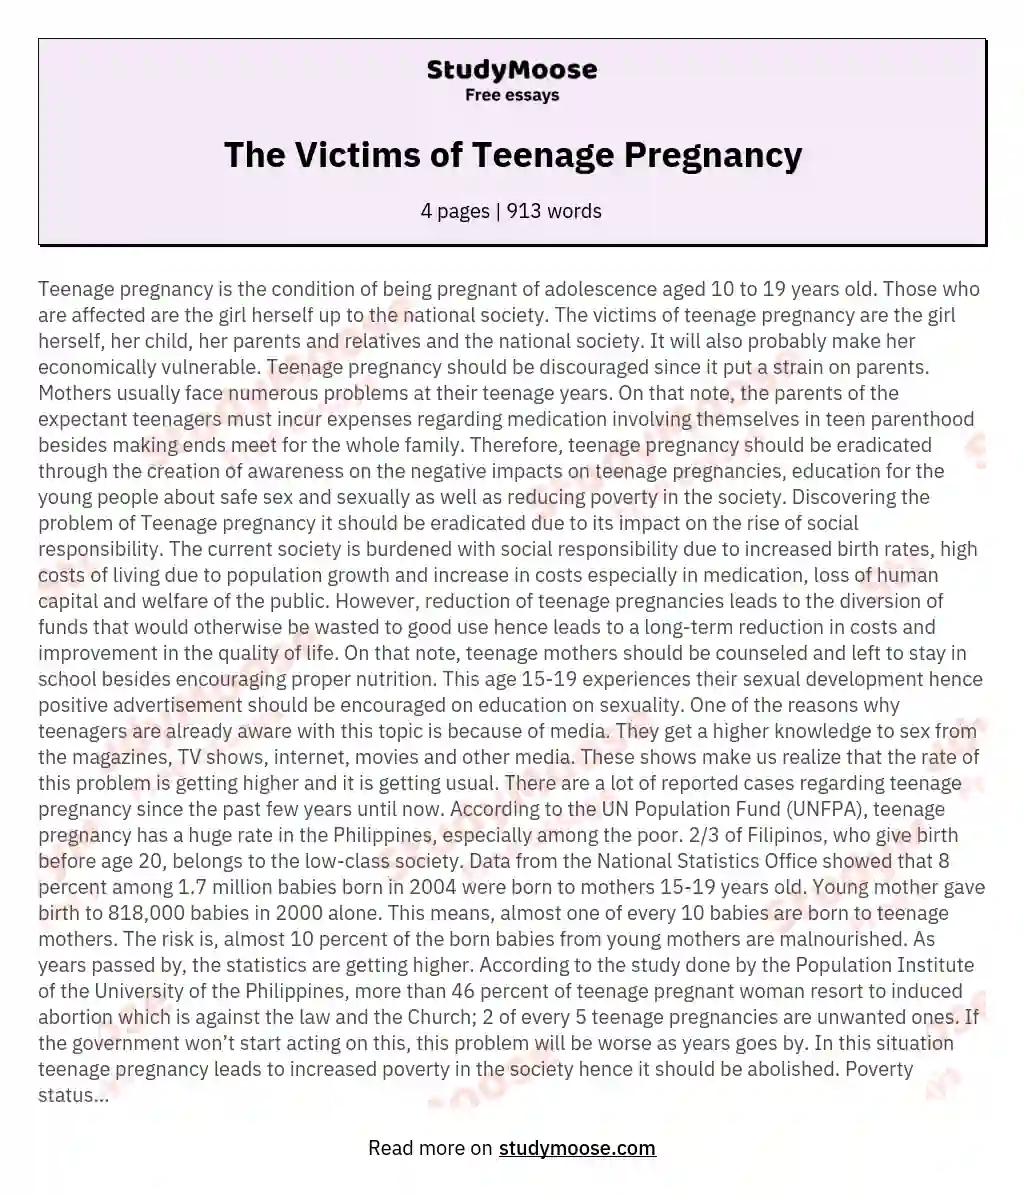 The Victims of Teenage Pregnancy essay